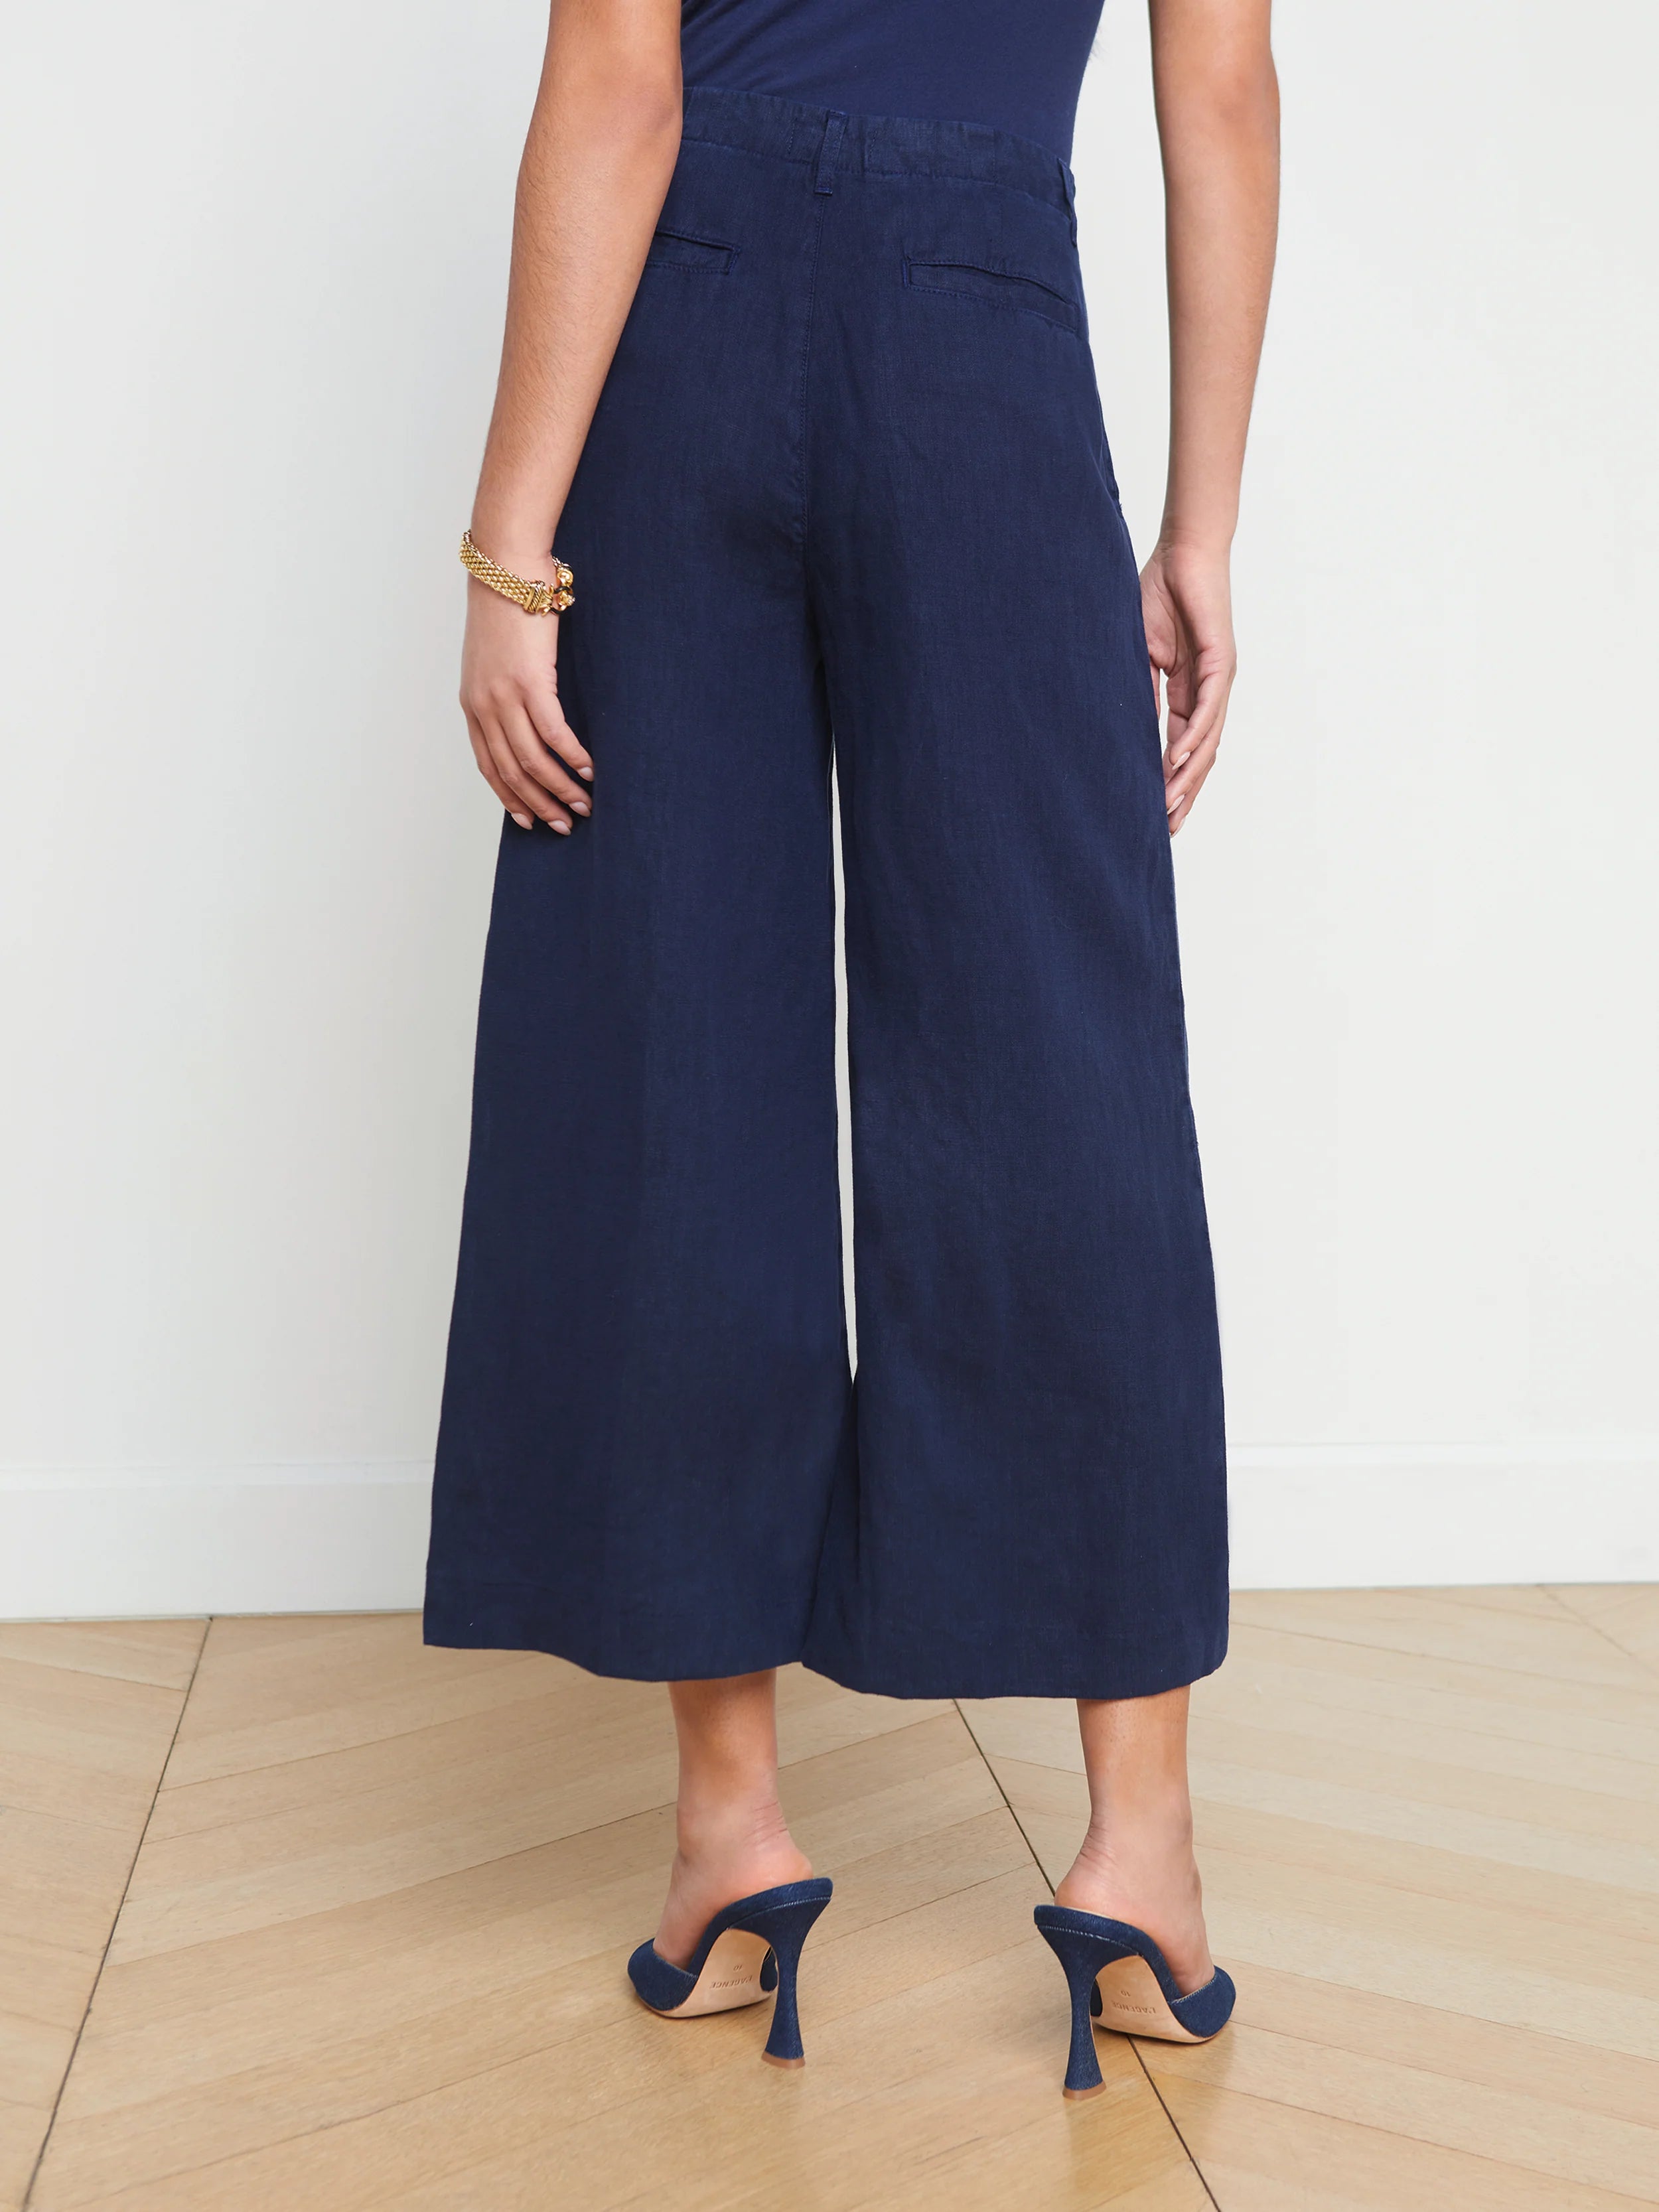 Henderson Linen Cropped Pant